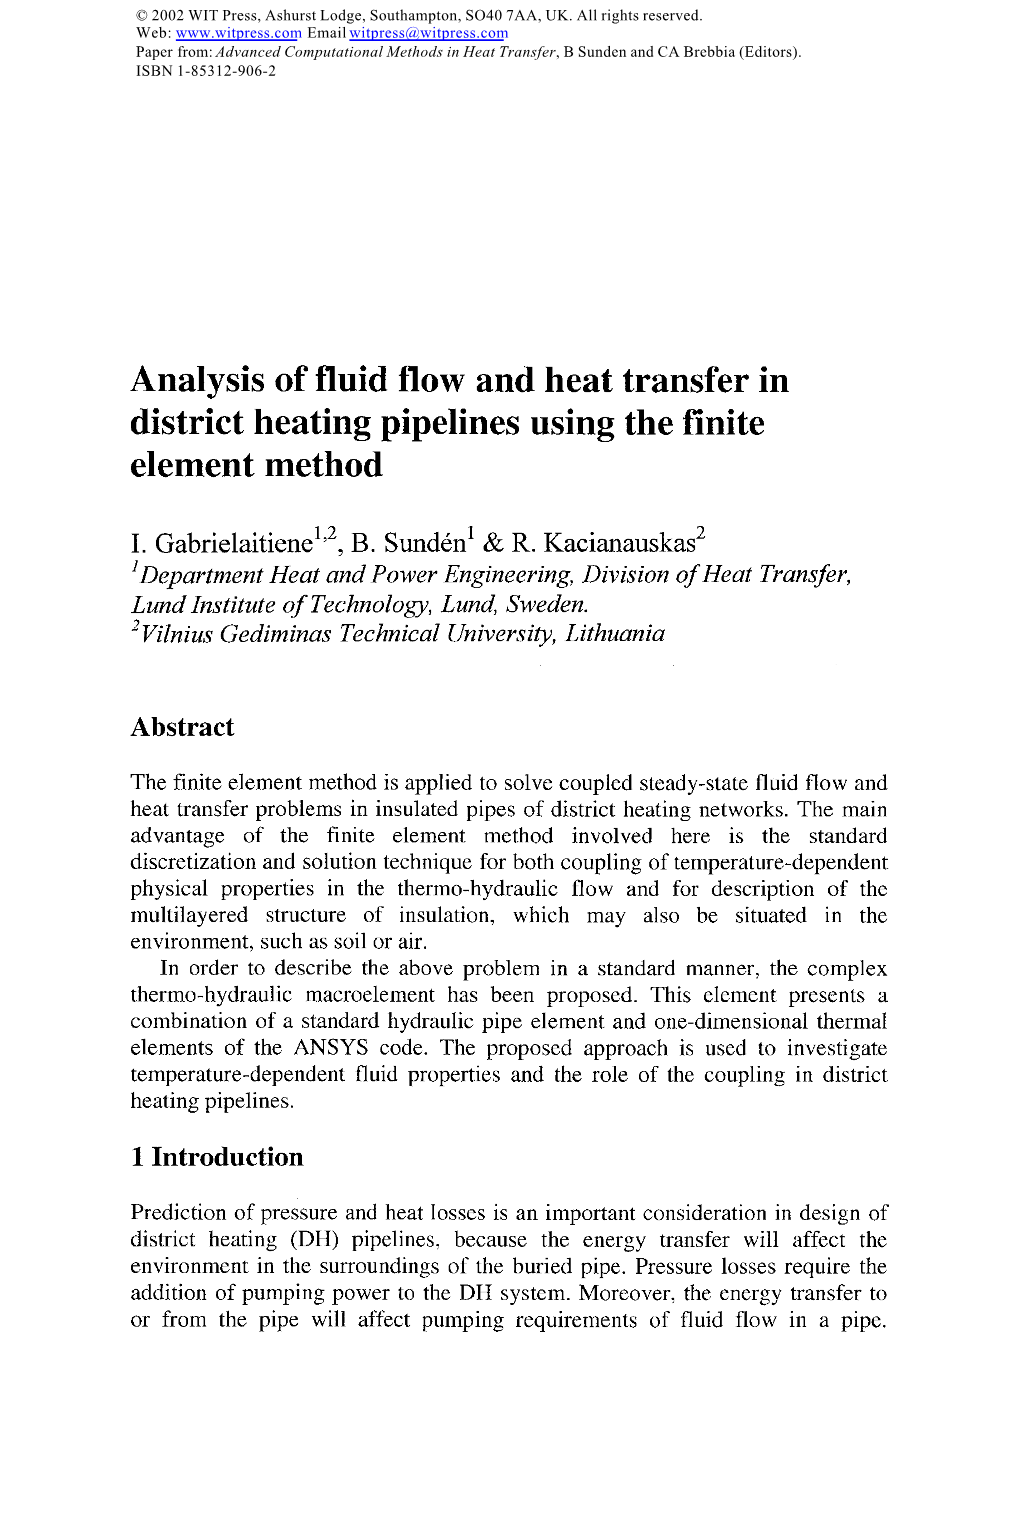 Element Method District Heating Pipelines Using the Finite Analysis of Fluid Flow Andheat Transfer In